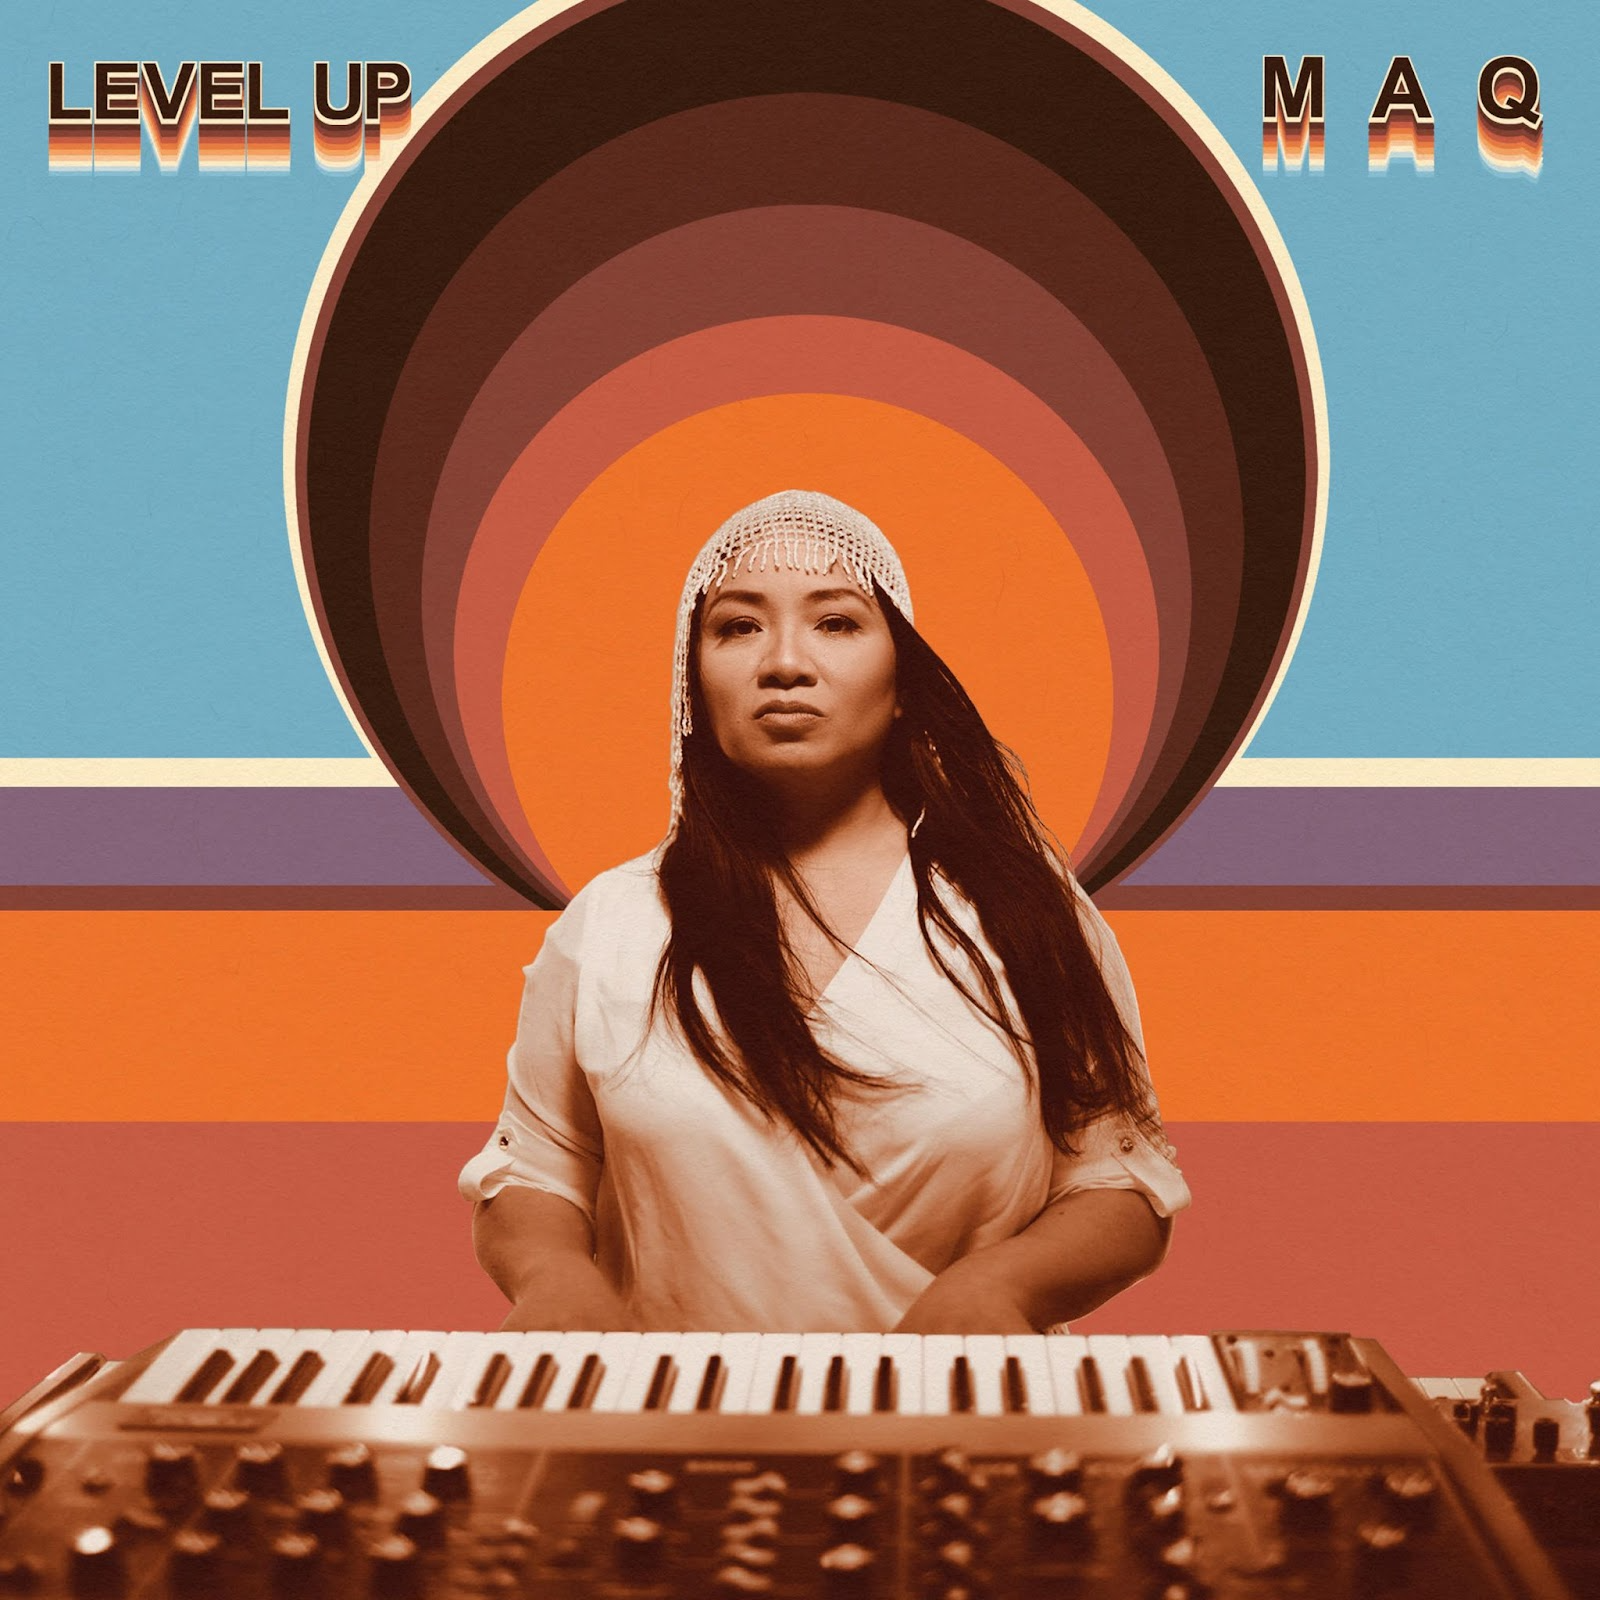 Album cover featuring a photo of Mary Ancheta behind a psychedelic background with a spiral with stripes, warm orange, blue, and purple. Ancheta is playing a keyboard and looking fiercely into the camera. She had long black hair, wearing a white headpiece and silky shirt.